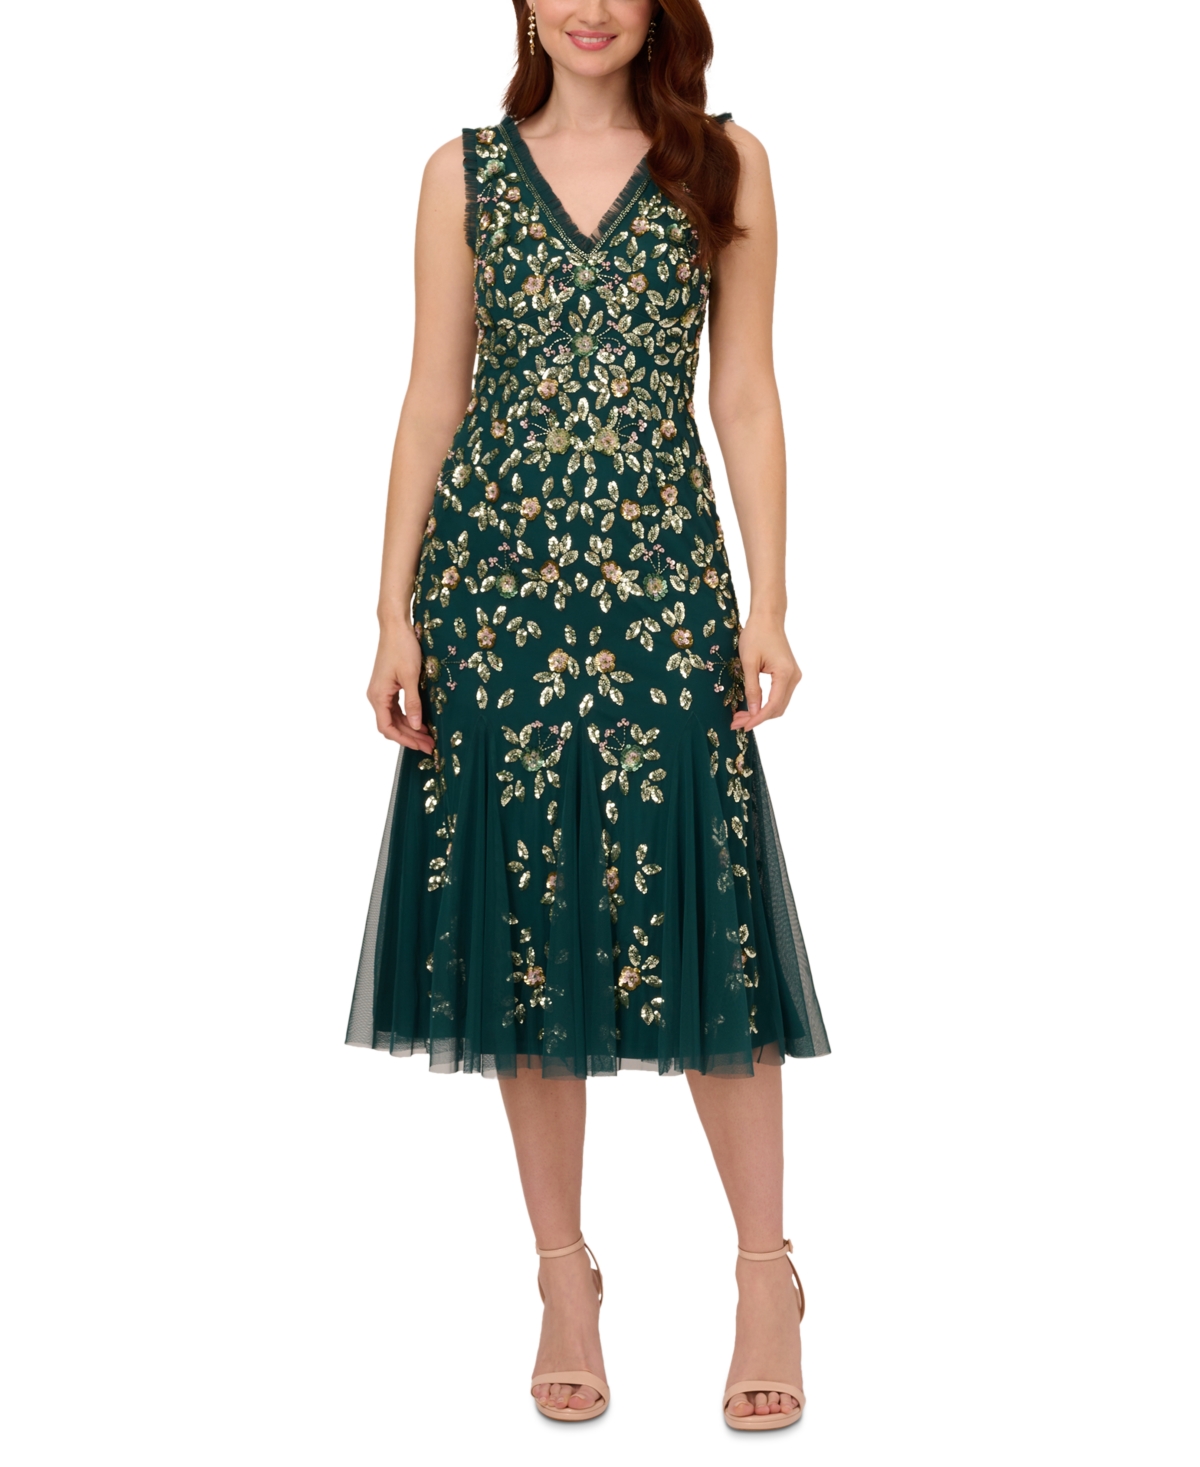 1920s Style Dresses, 1920s Dress Fashions You Will Love Adrianna Papell Womens Embellished Ruffled Godet Dress - Gem Green $299.00 AT vintagedancer.com